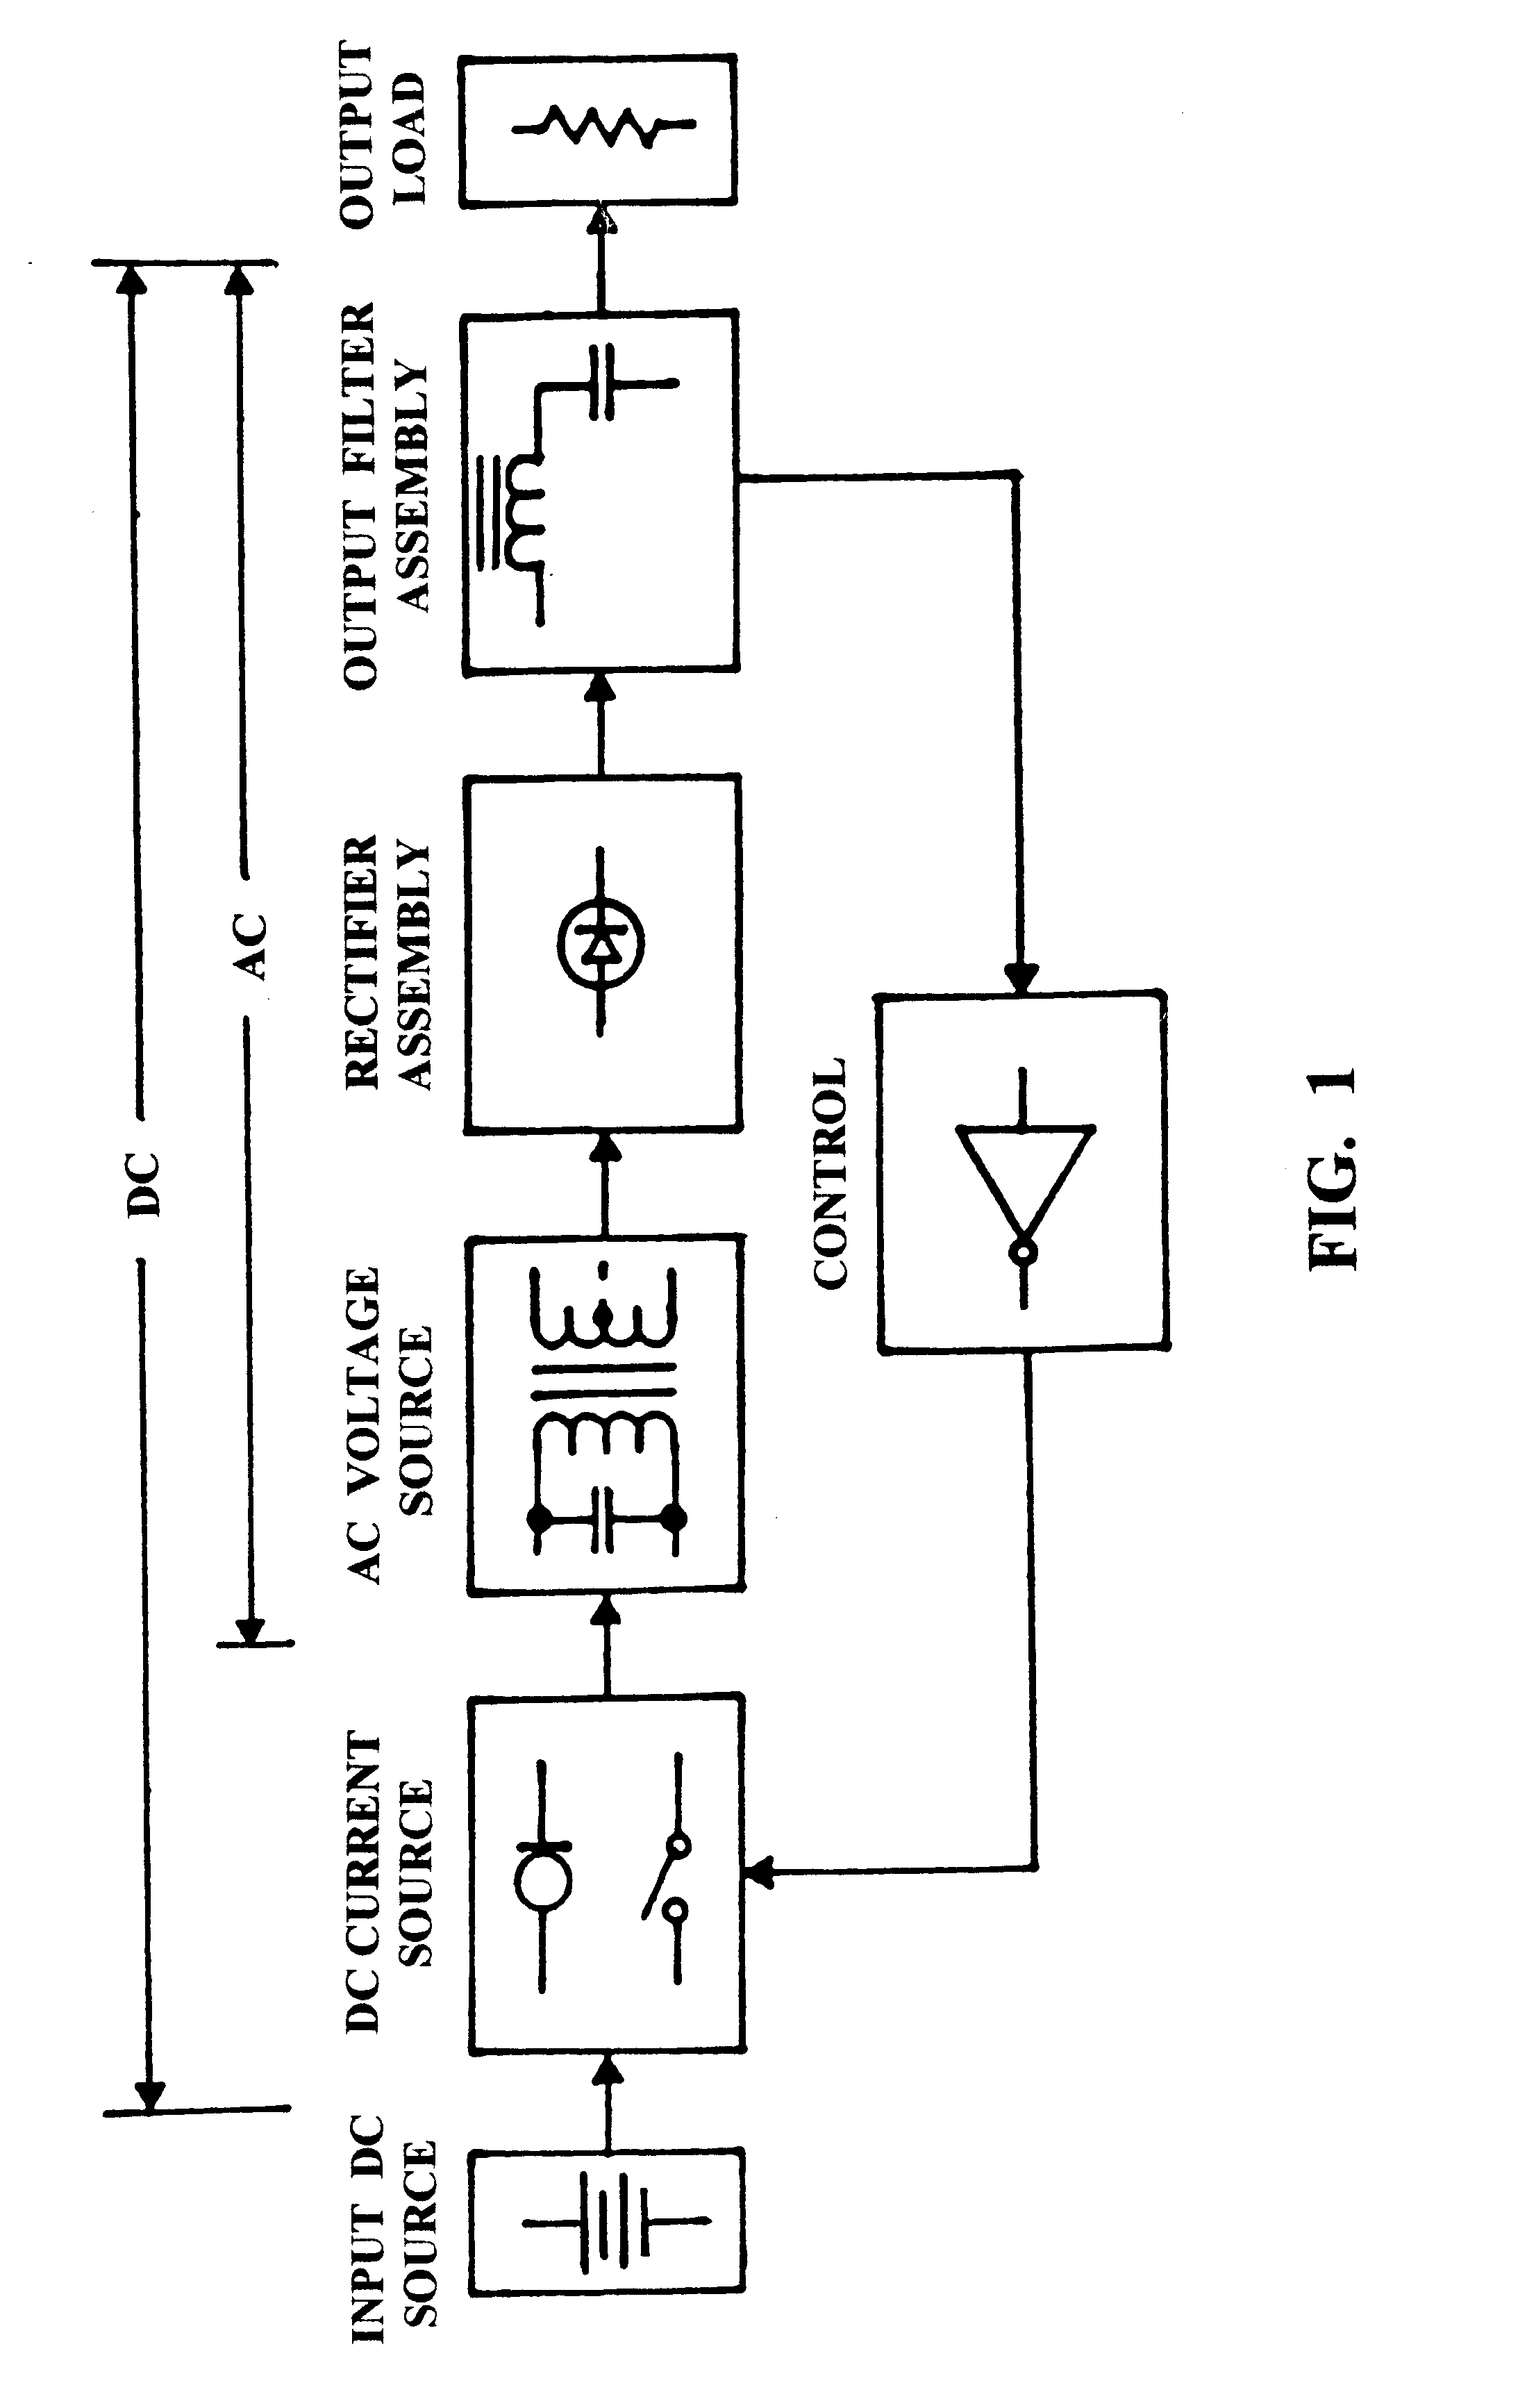 Resonant power converter with primary-side tuning and zero-current switching